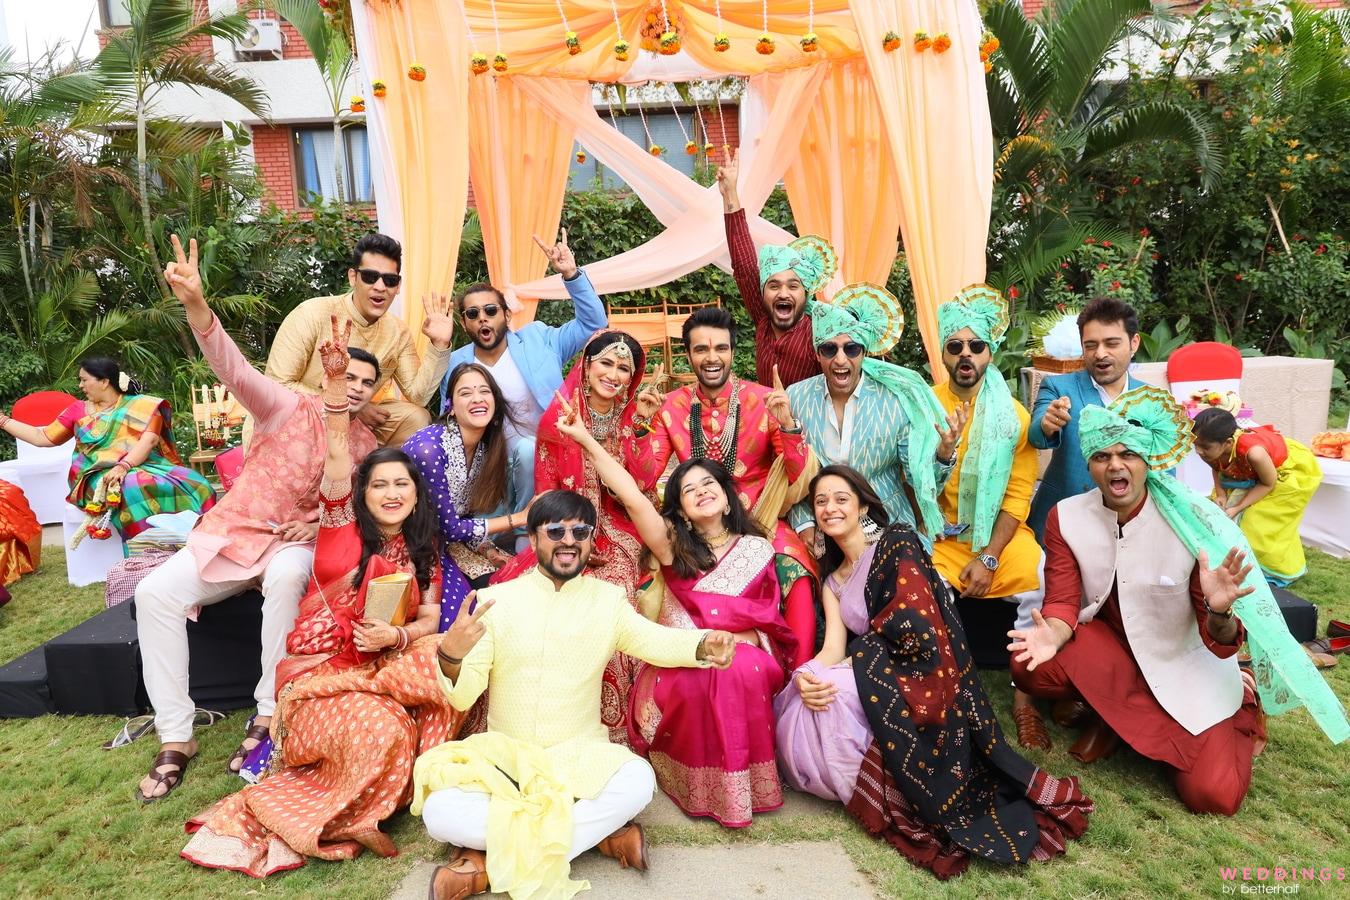 Mirraw - When the bride gets all the love from her family and friends  during Haldi Ceremony. Tag your wedding squad who will enjoy your wedding  as much as you will ❤ . . . .